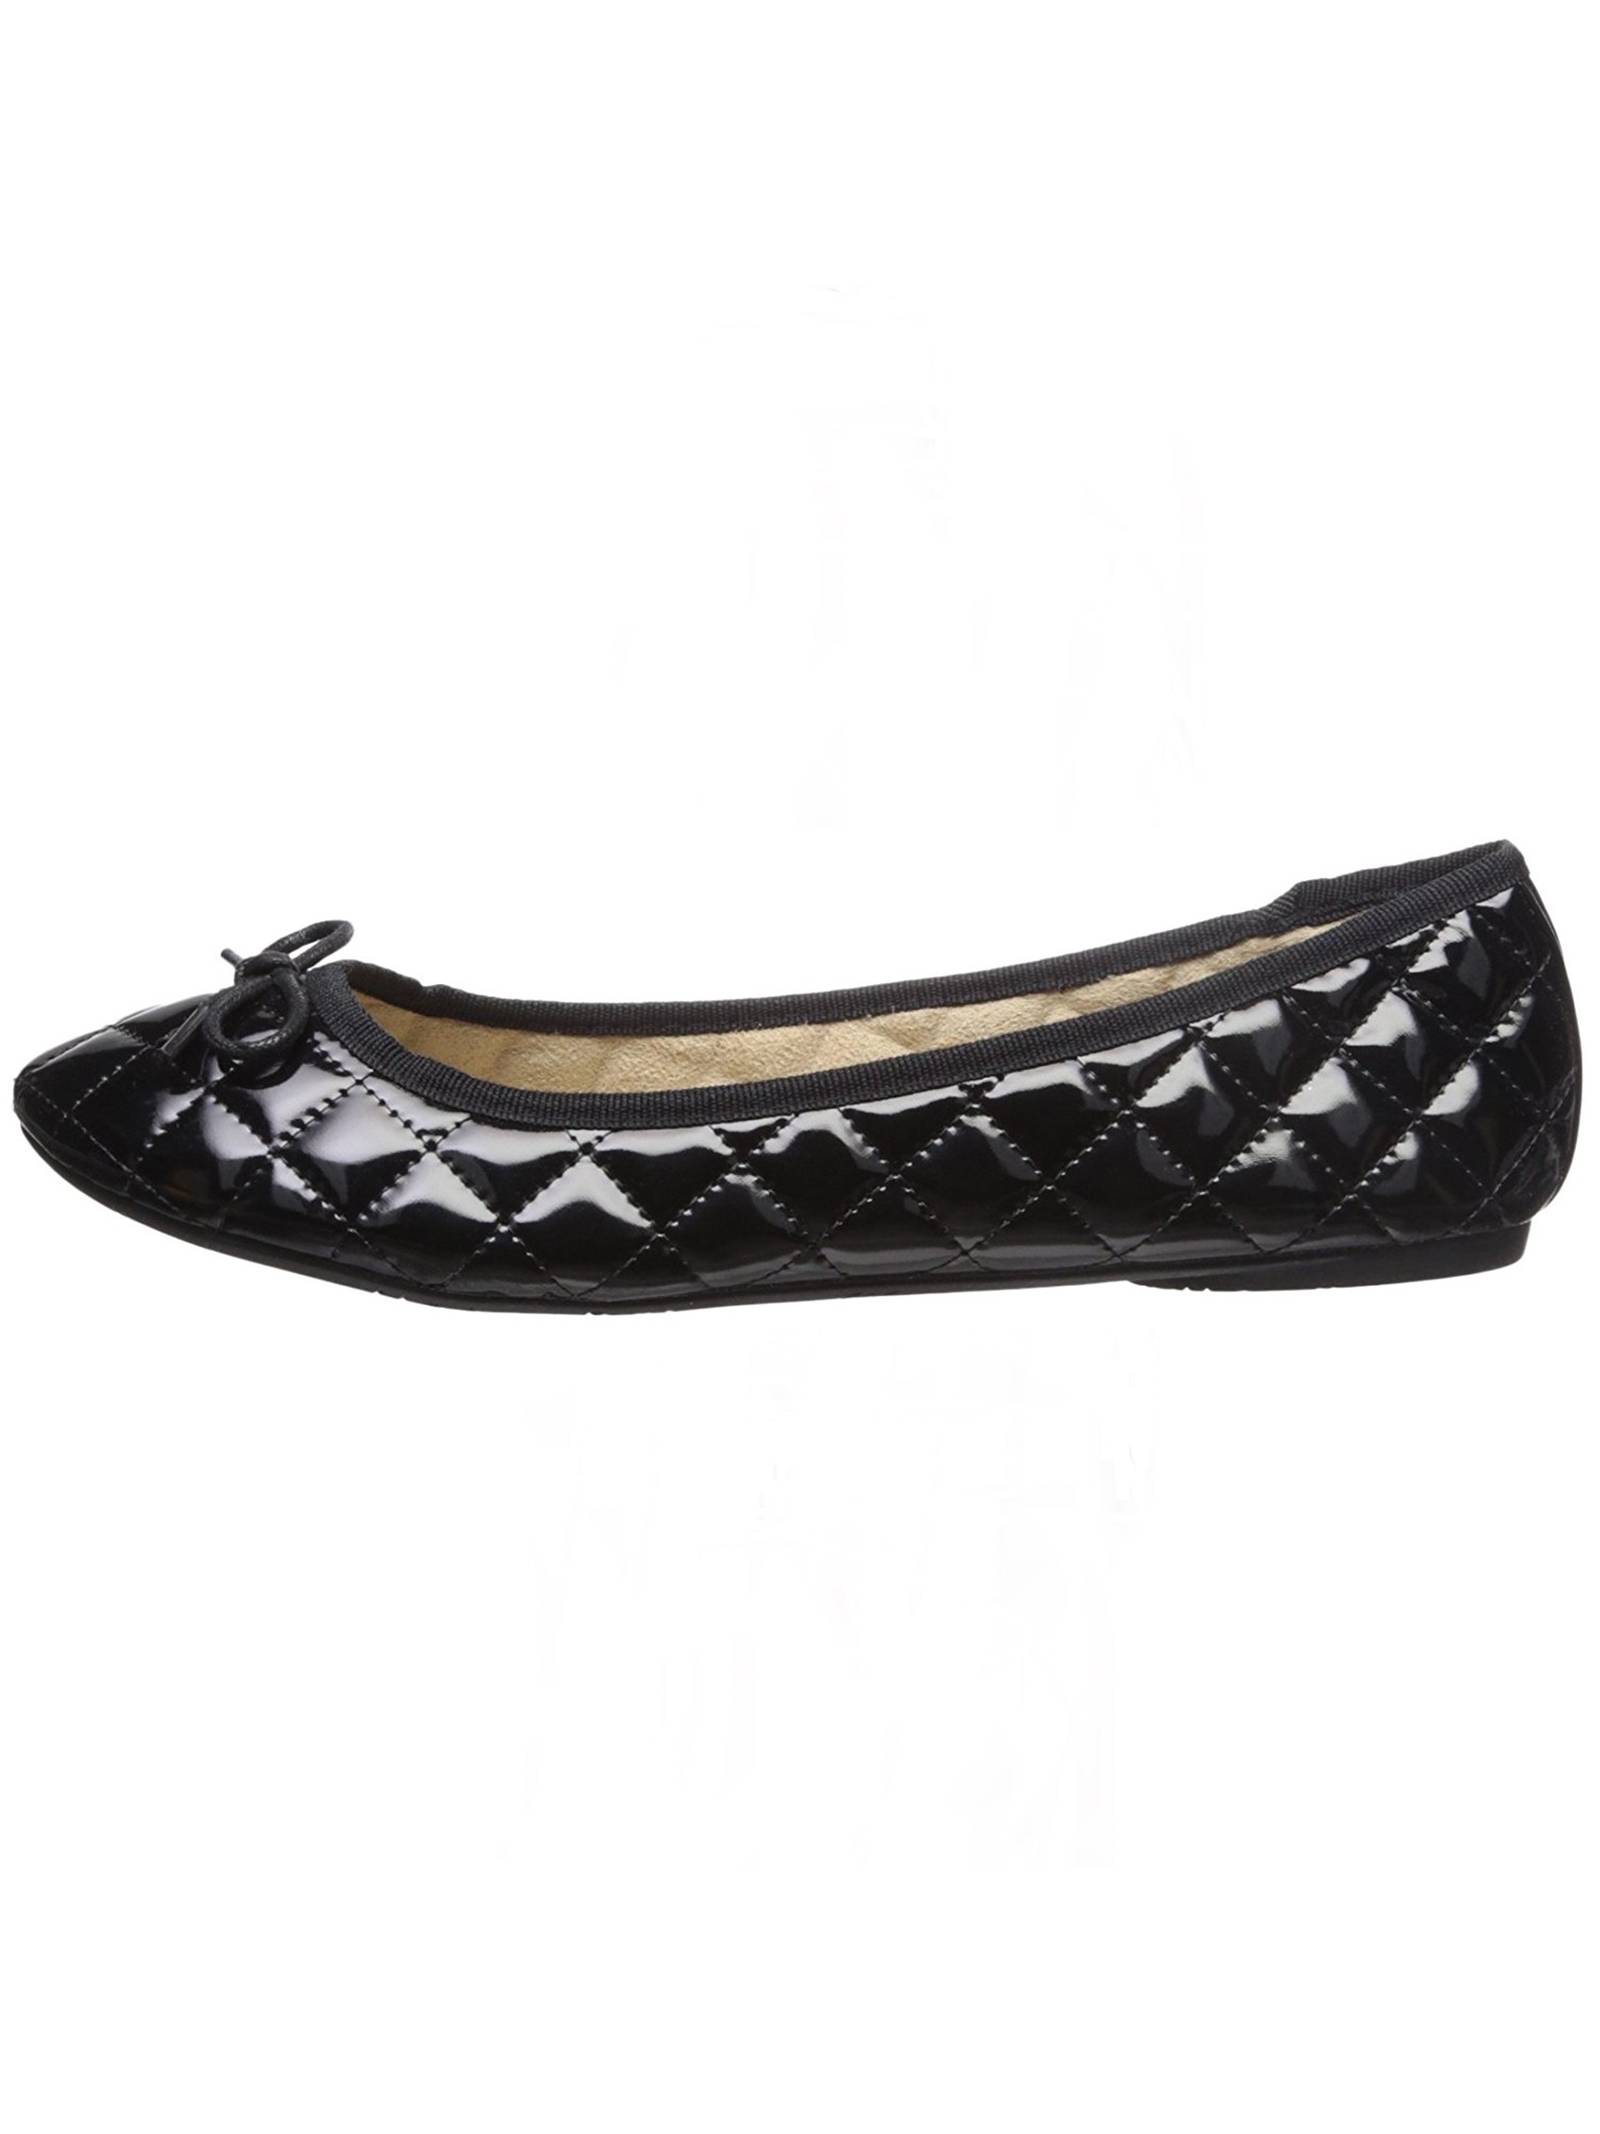 Alpine Swiss Aster Womens Comfort Ballet Flats Faux Patent Leather Slip On Shoes - image 2 of 7